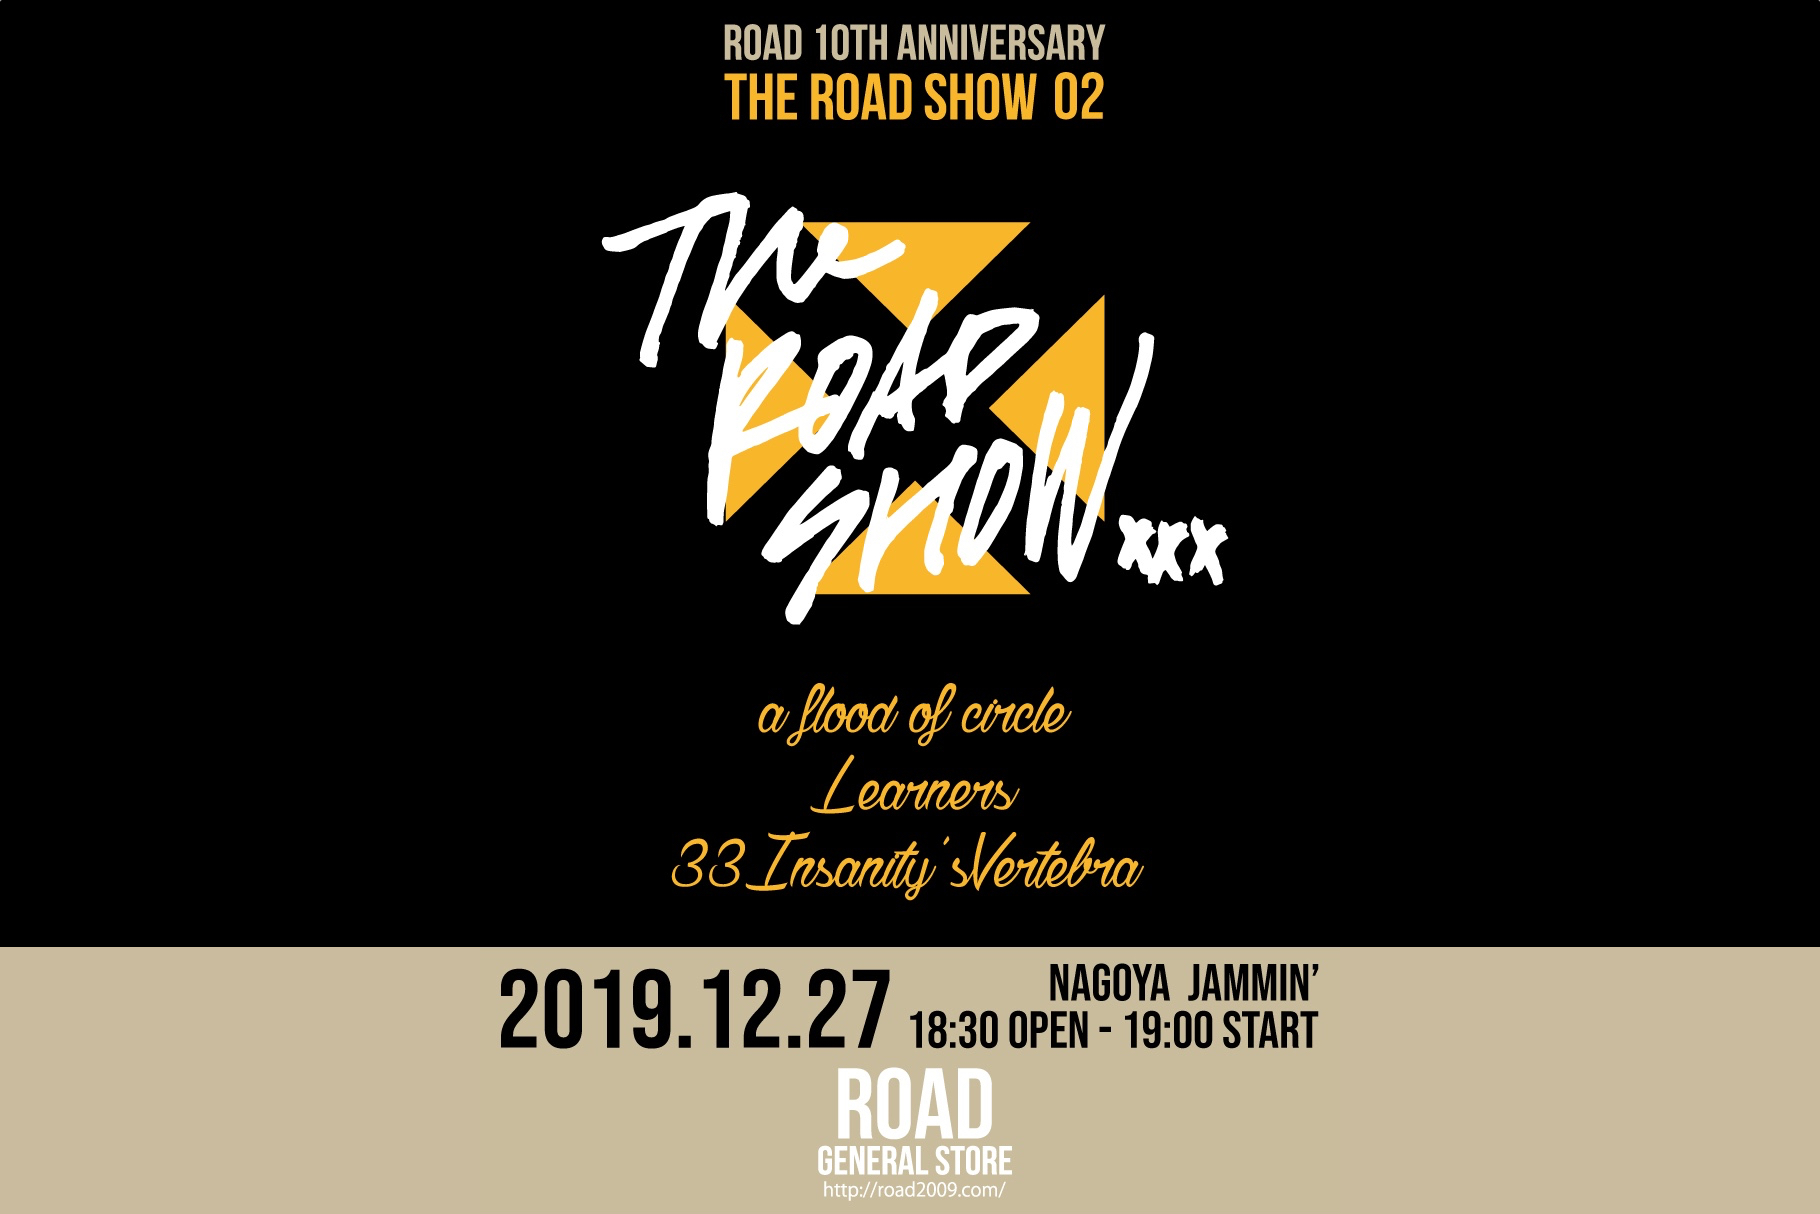 THE ROAD SHOW 第２弾の開催が決定。AFOC / LEARNERS / 33IVが出演